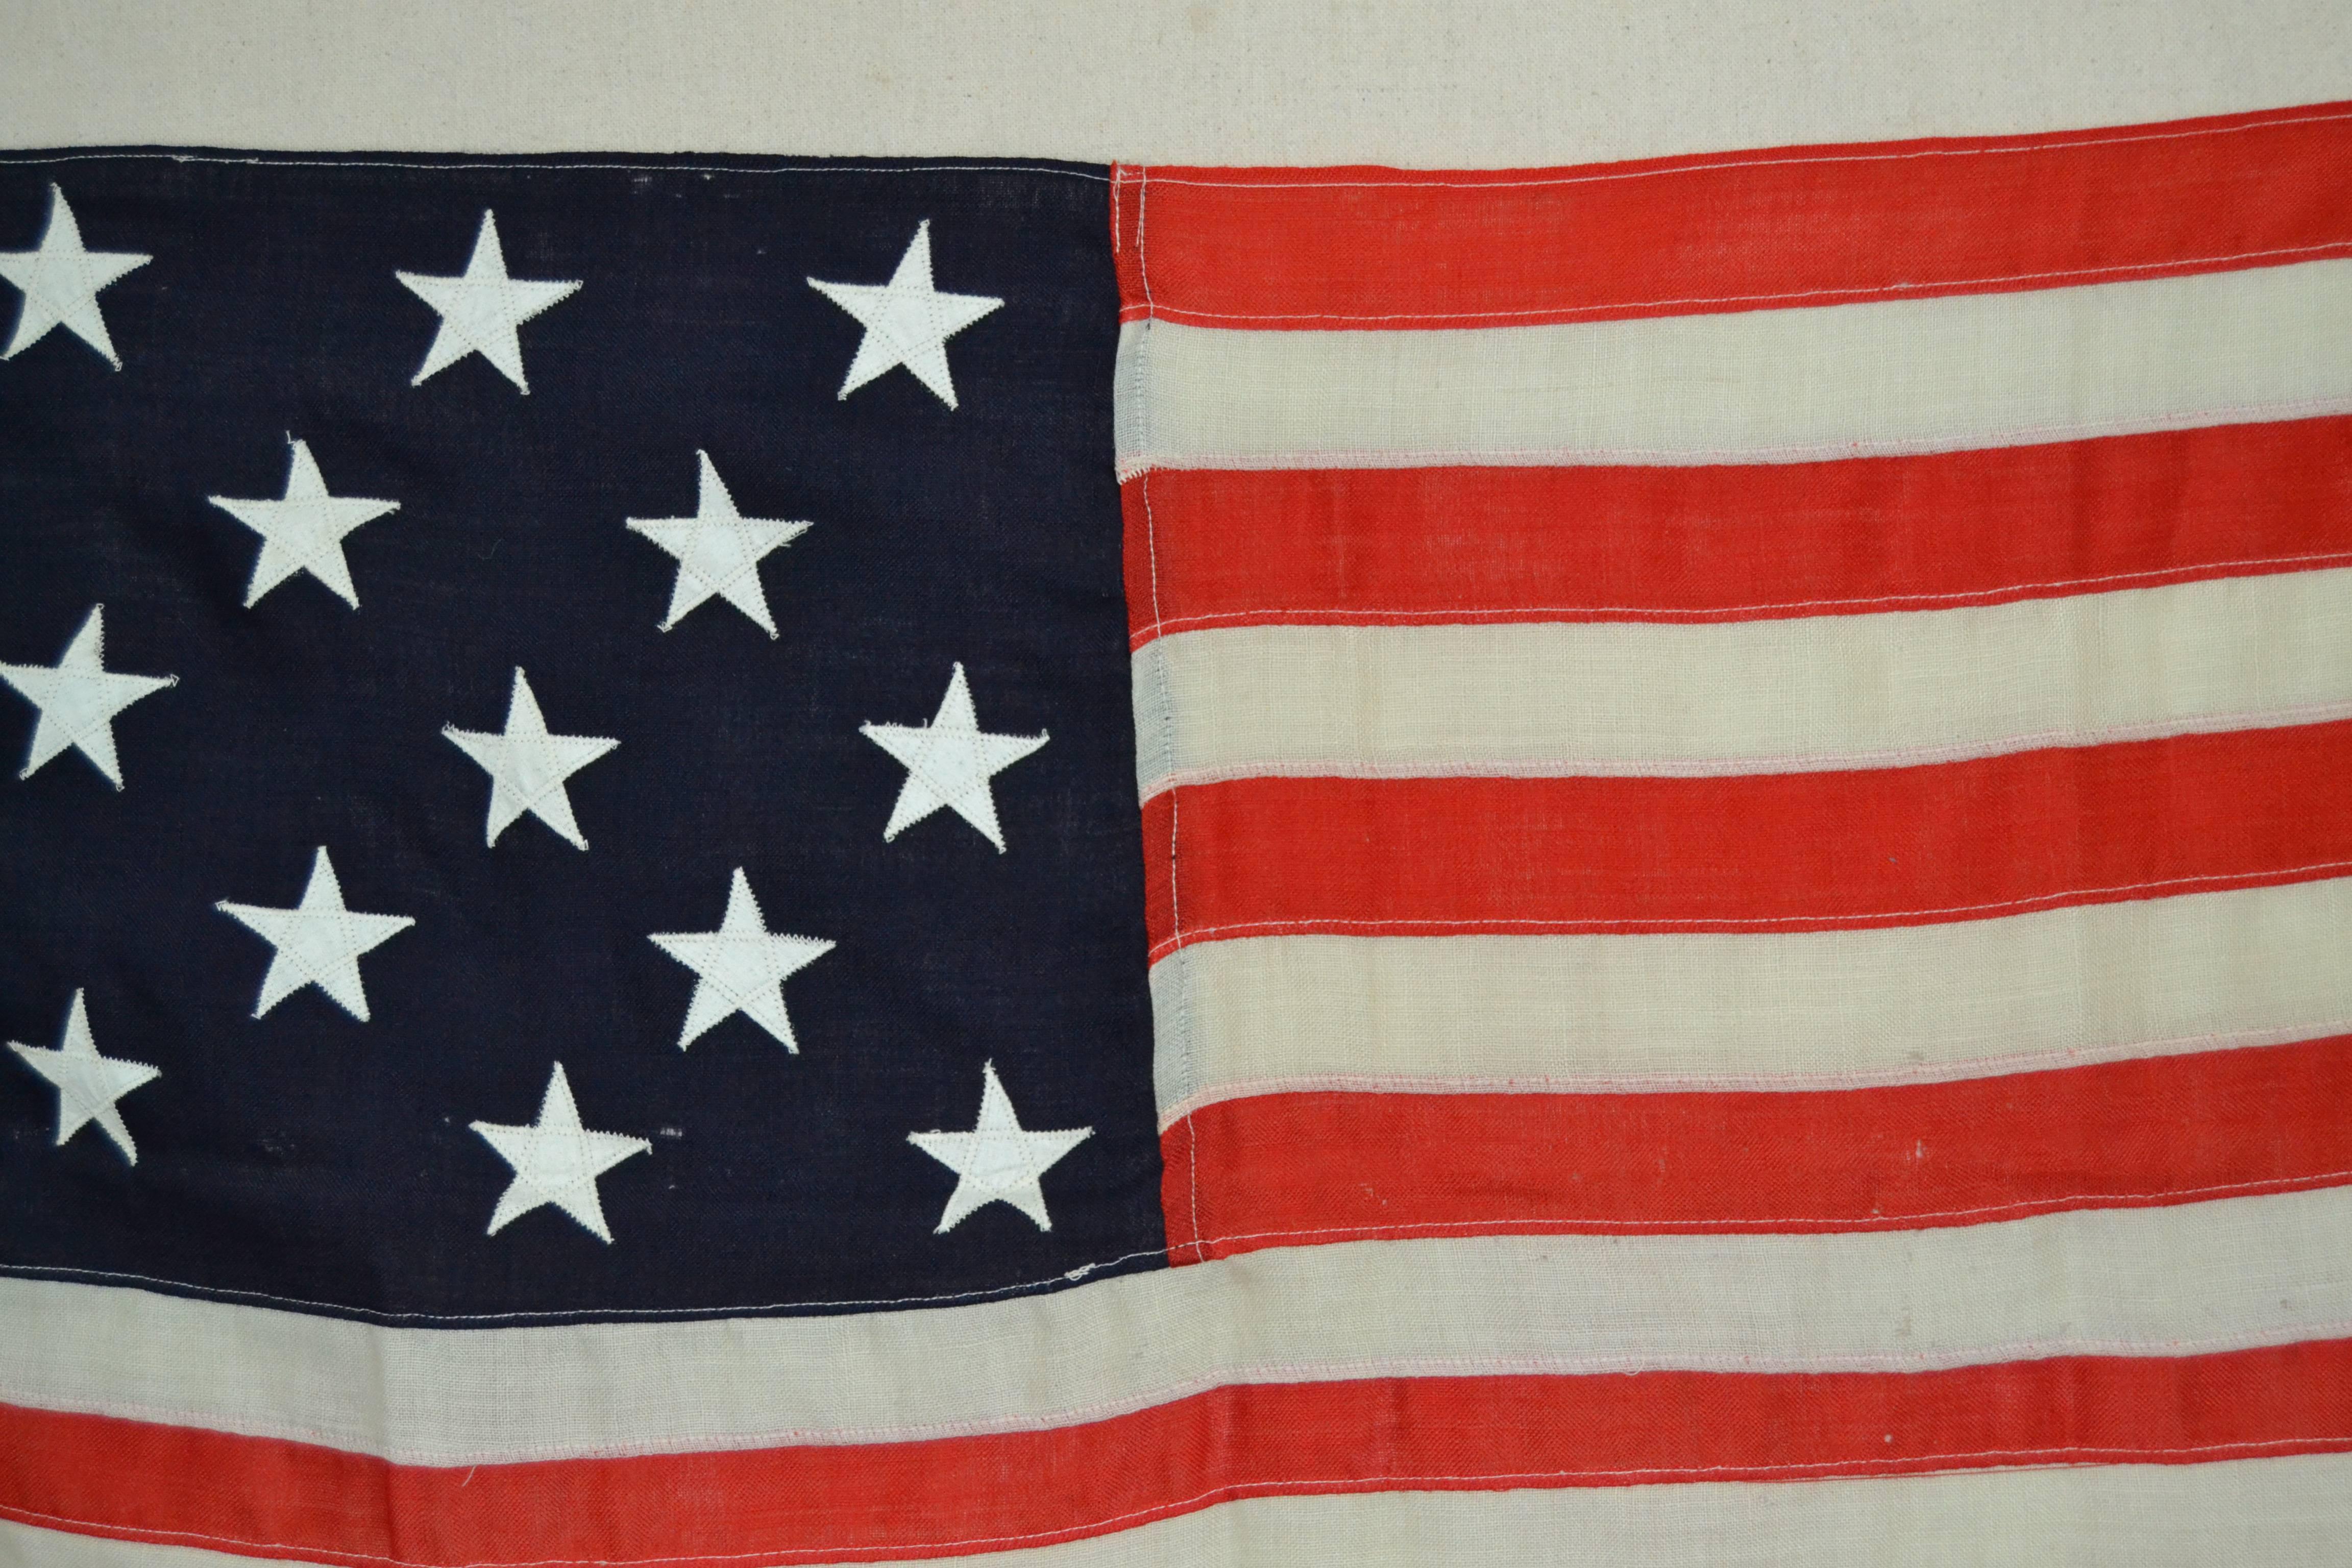 Antique sewn flag from the late 19th or early 20th century with the stars arranged in rows or 3-2-3-2-3 stars, a pattern often seen during this period. The canton and stripes are of wool bunting with double-appliqued cotton stars and a heavy cotton